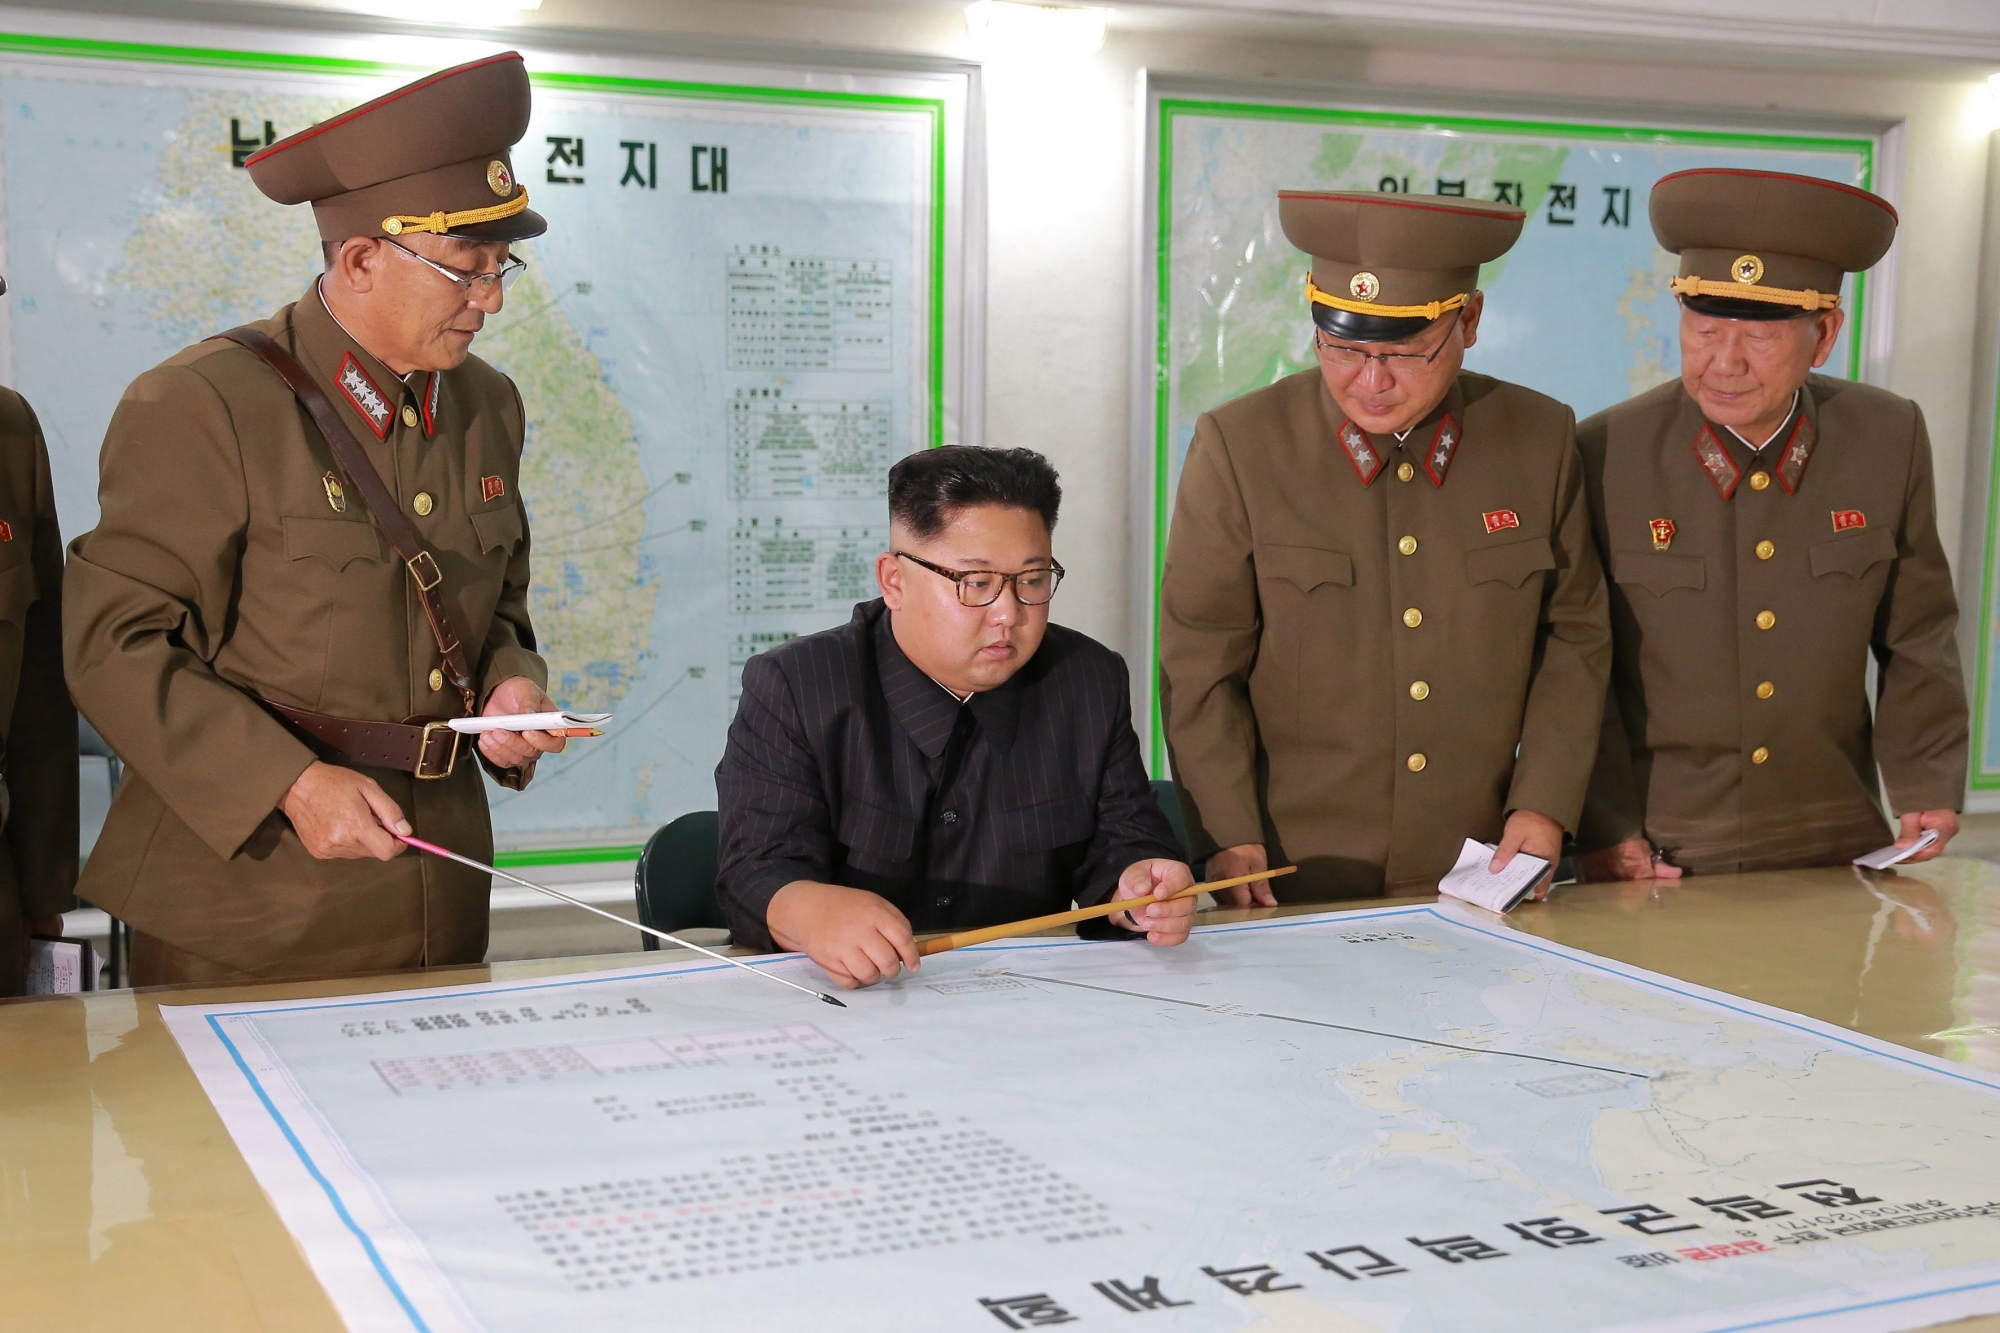 epa06145192 A picture released by the North Korean Central News Agency (KCNA) North Korean leader Kim Jong Un inspecting plans to fire missiles towards the US Pacific territory of Guam at the Command of the Strategic Force of the Korean People's Army (KPA), Pyongyang, DPRK: North Korean 14 August 2017, (issued 15 August 2017). According to North Korean state media on 09 August 2017, the North is considering a potential pre-emptive strike with medium-to-long-range strategic ballistic missiles on Guam, where US tactical bombers are based. The threat follows US President Donald J. Trump's warning to Pyongyang that any threat to the USA 'will be met with fire and fury like the world has never seen.' The exchanges marked rising tensions between the two countries.  EPA/KCNA NORTH KOREA KIM JONG UN INSPECTS MILITARY PLANS